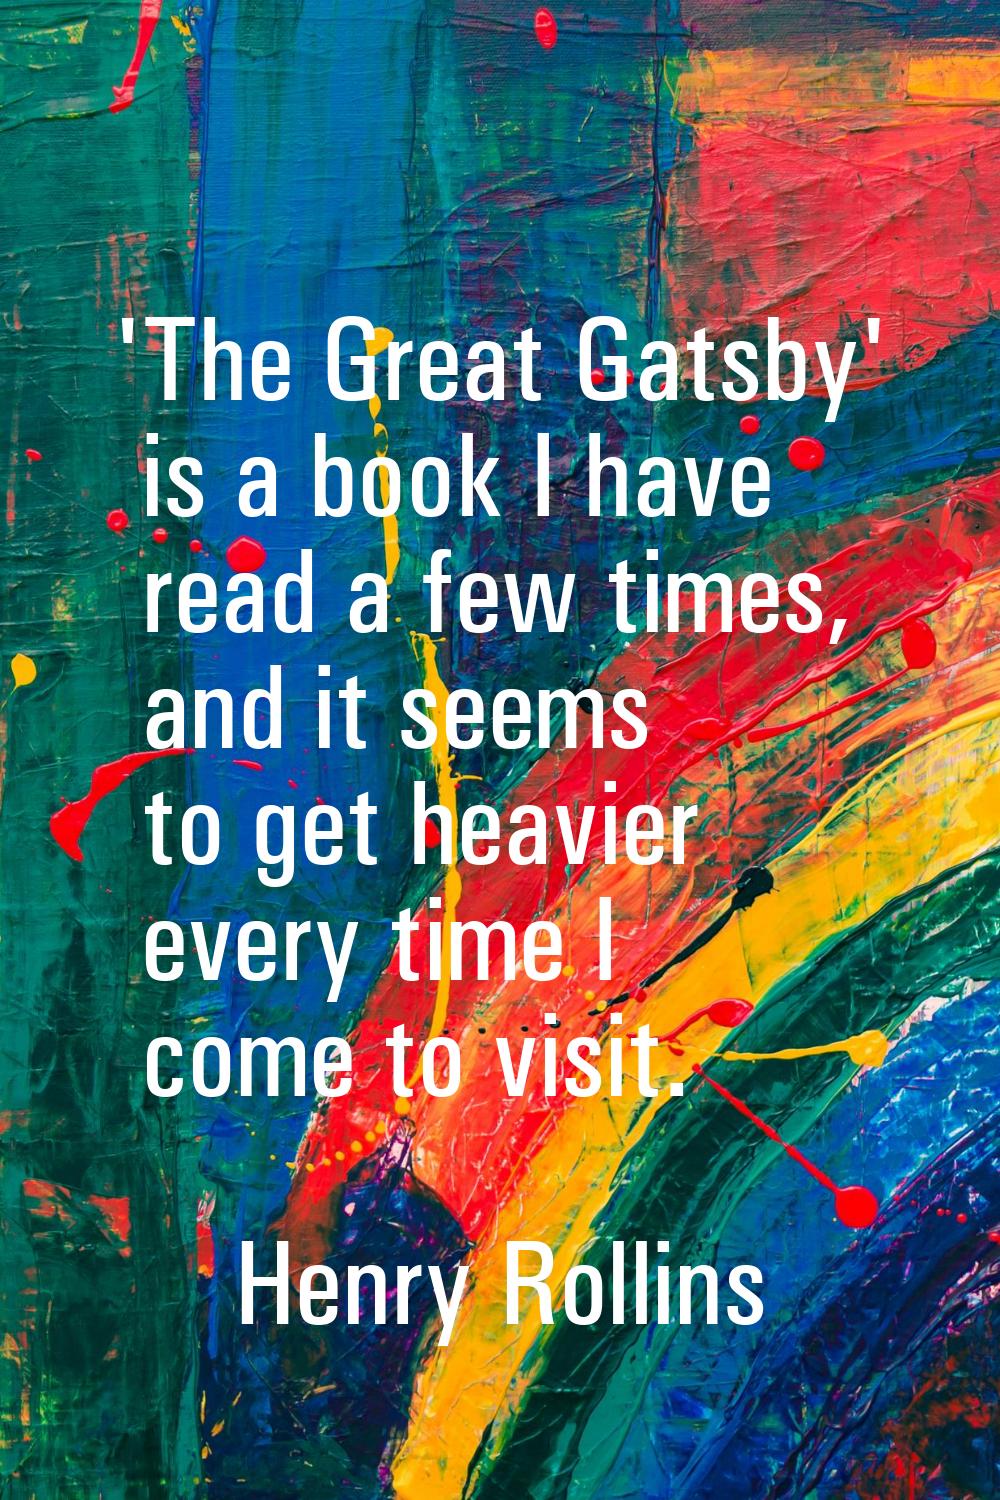 'The Great Gatsby' is a book I have read a few times, and it seems to get heavier every time I come